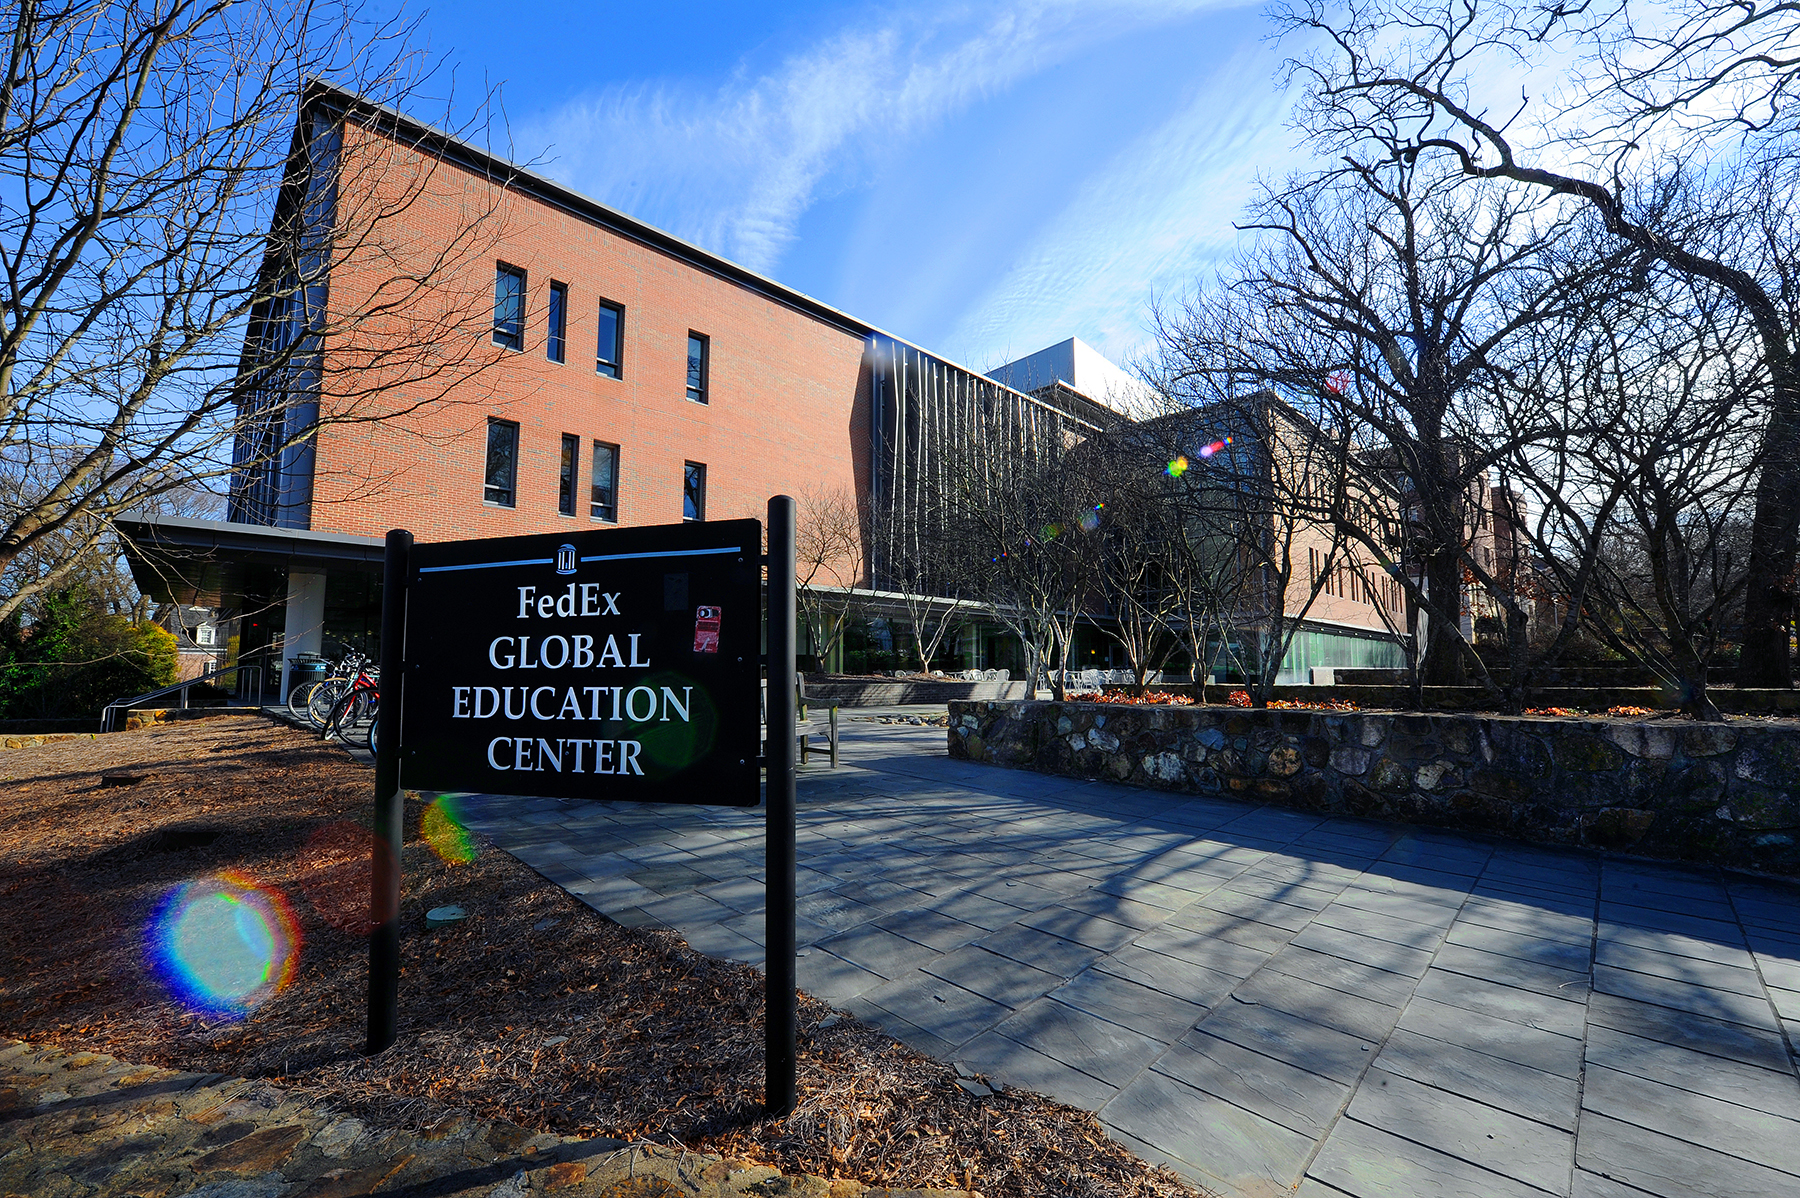 The FedEx Global Education Center building